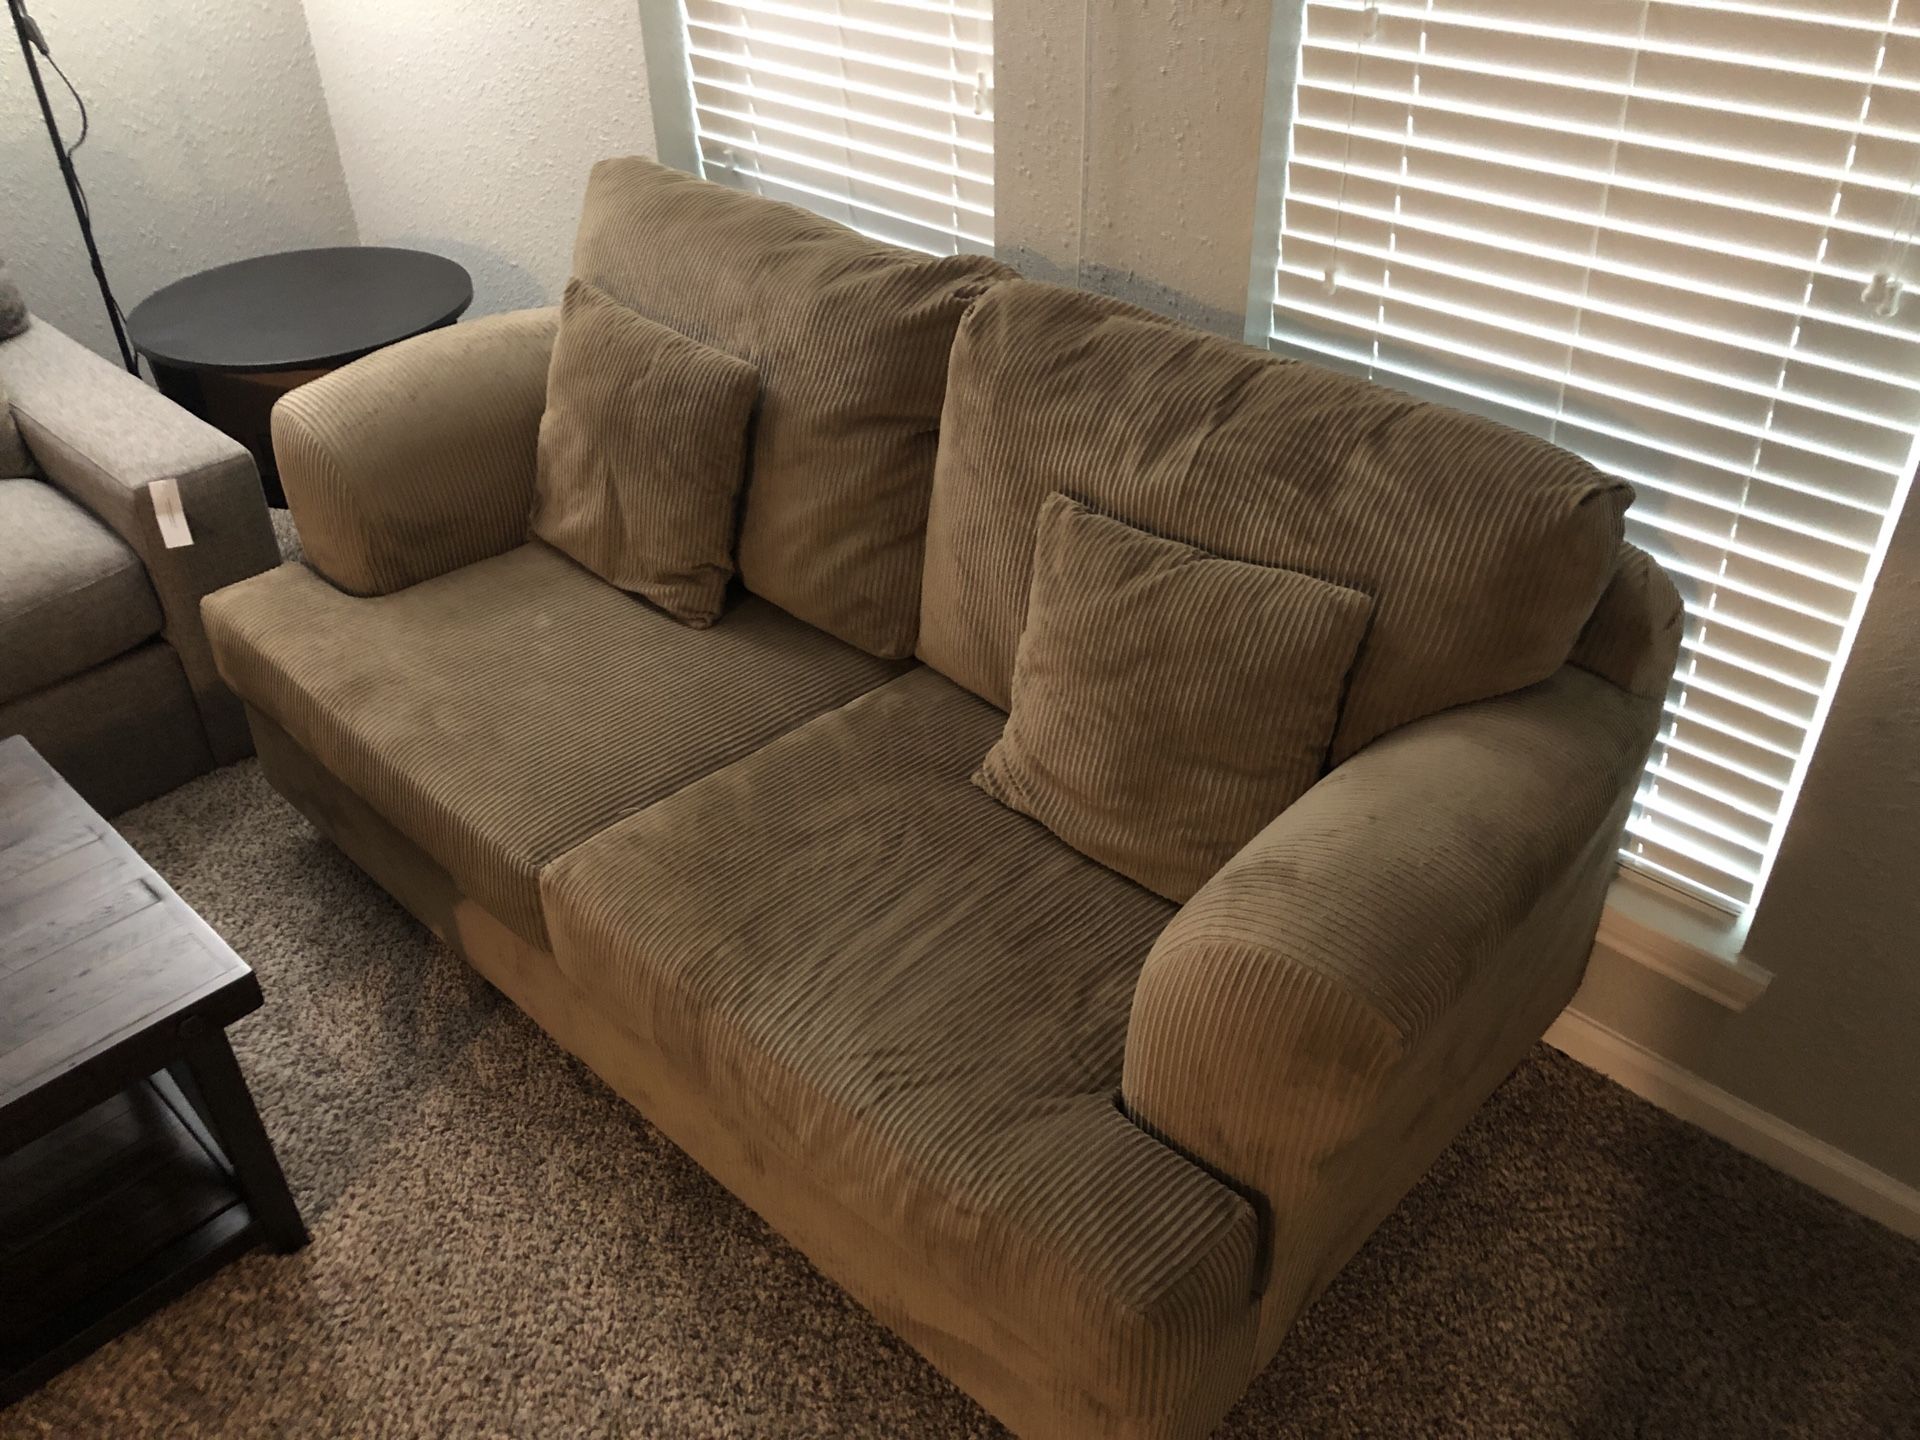 Oversized Love Couch and a Sony 52” HDTV 1080P